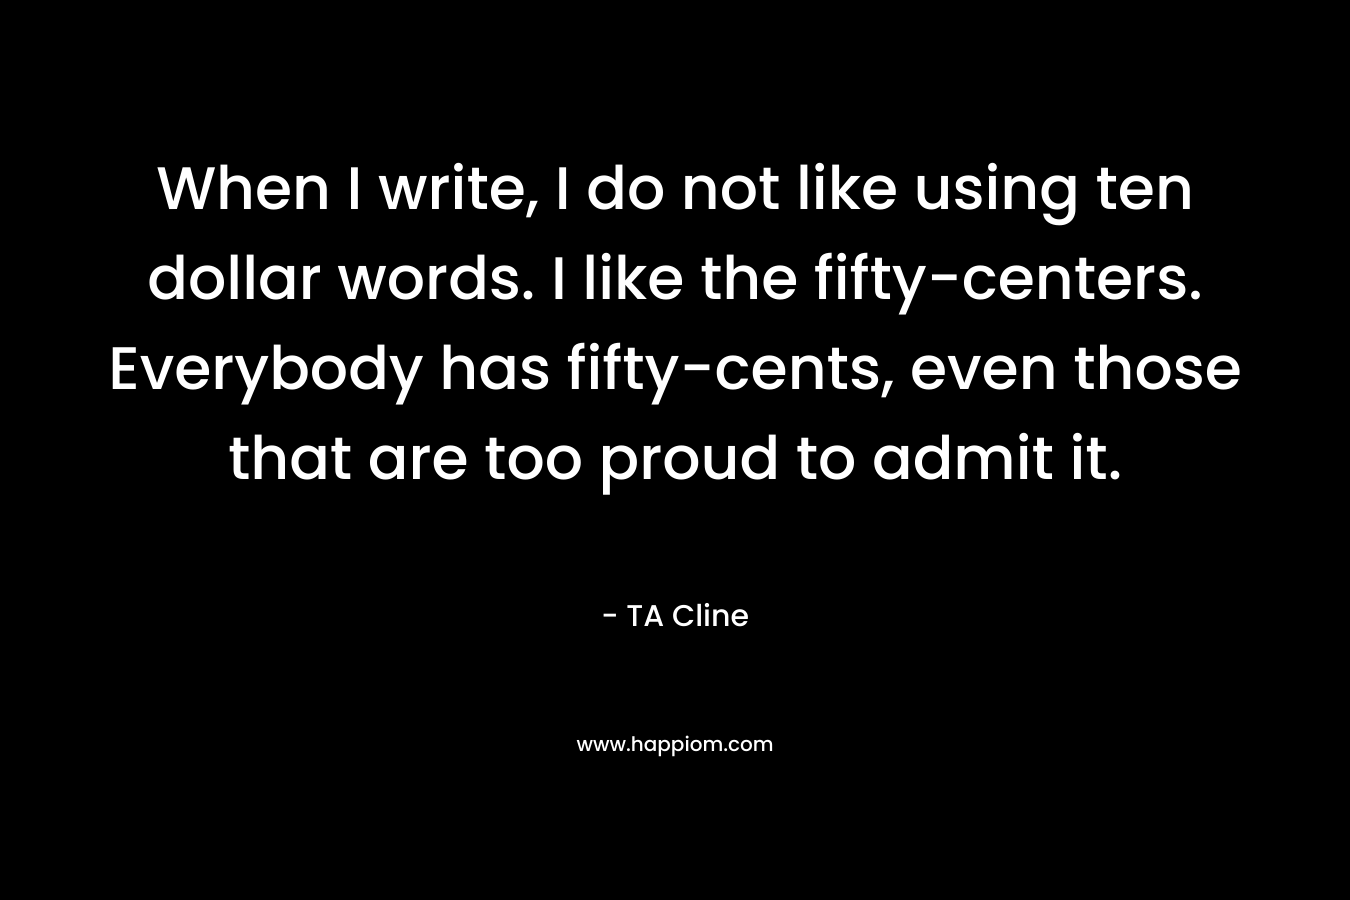 When I write, I do not like using ten dollar words. I like the fifty-centers. Everybody has fifty-cents, even those that are too proud to admit it.